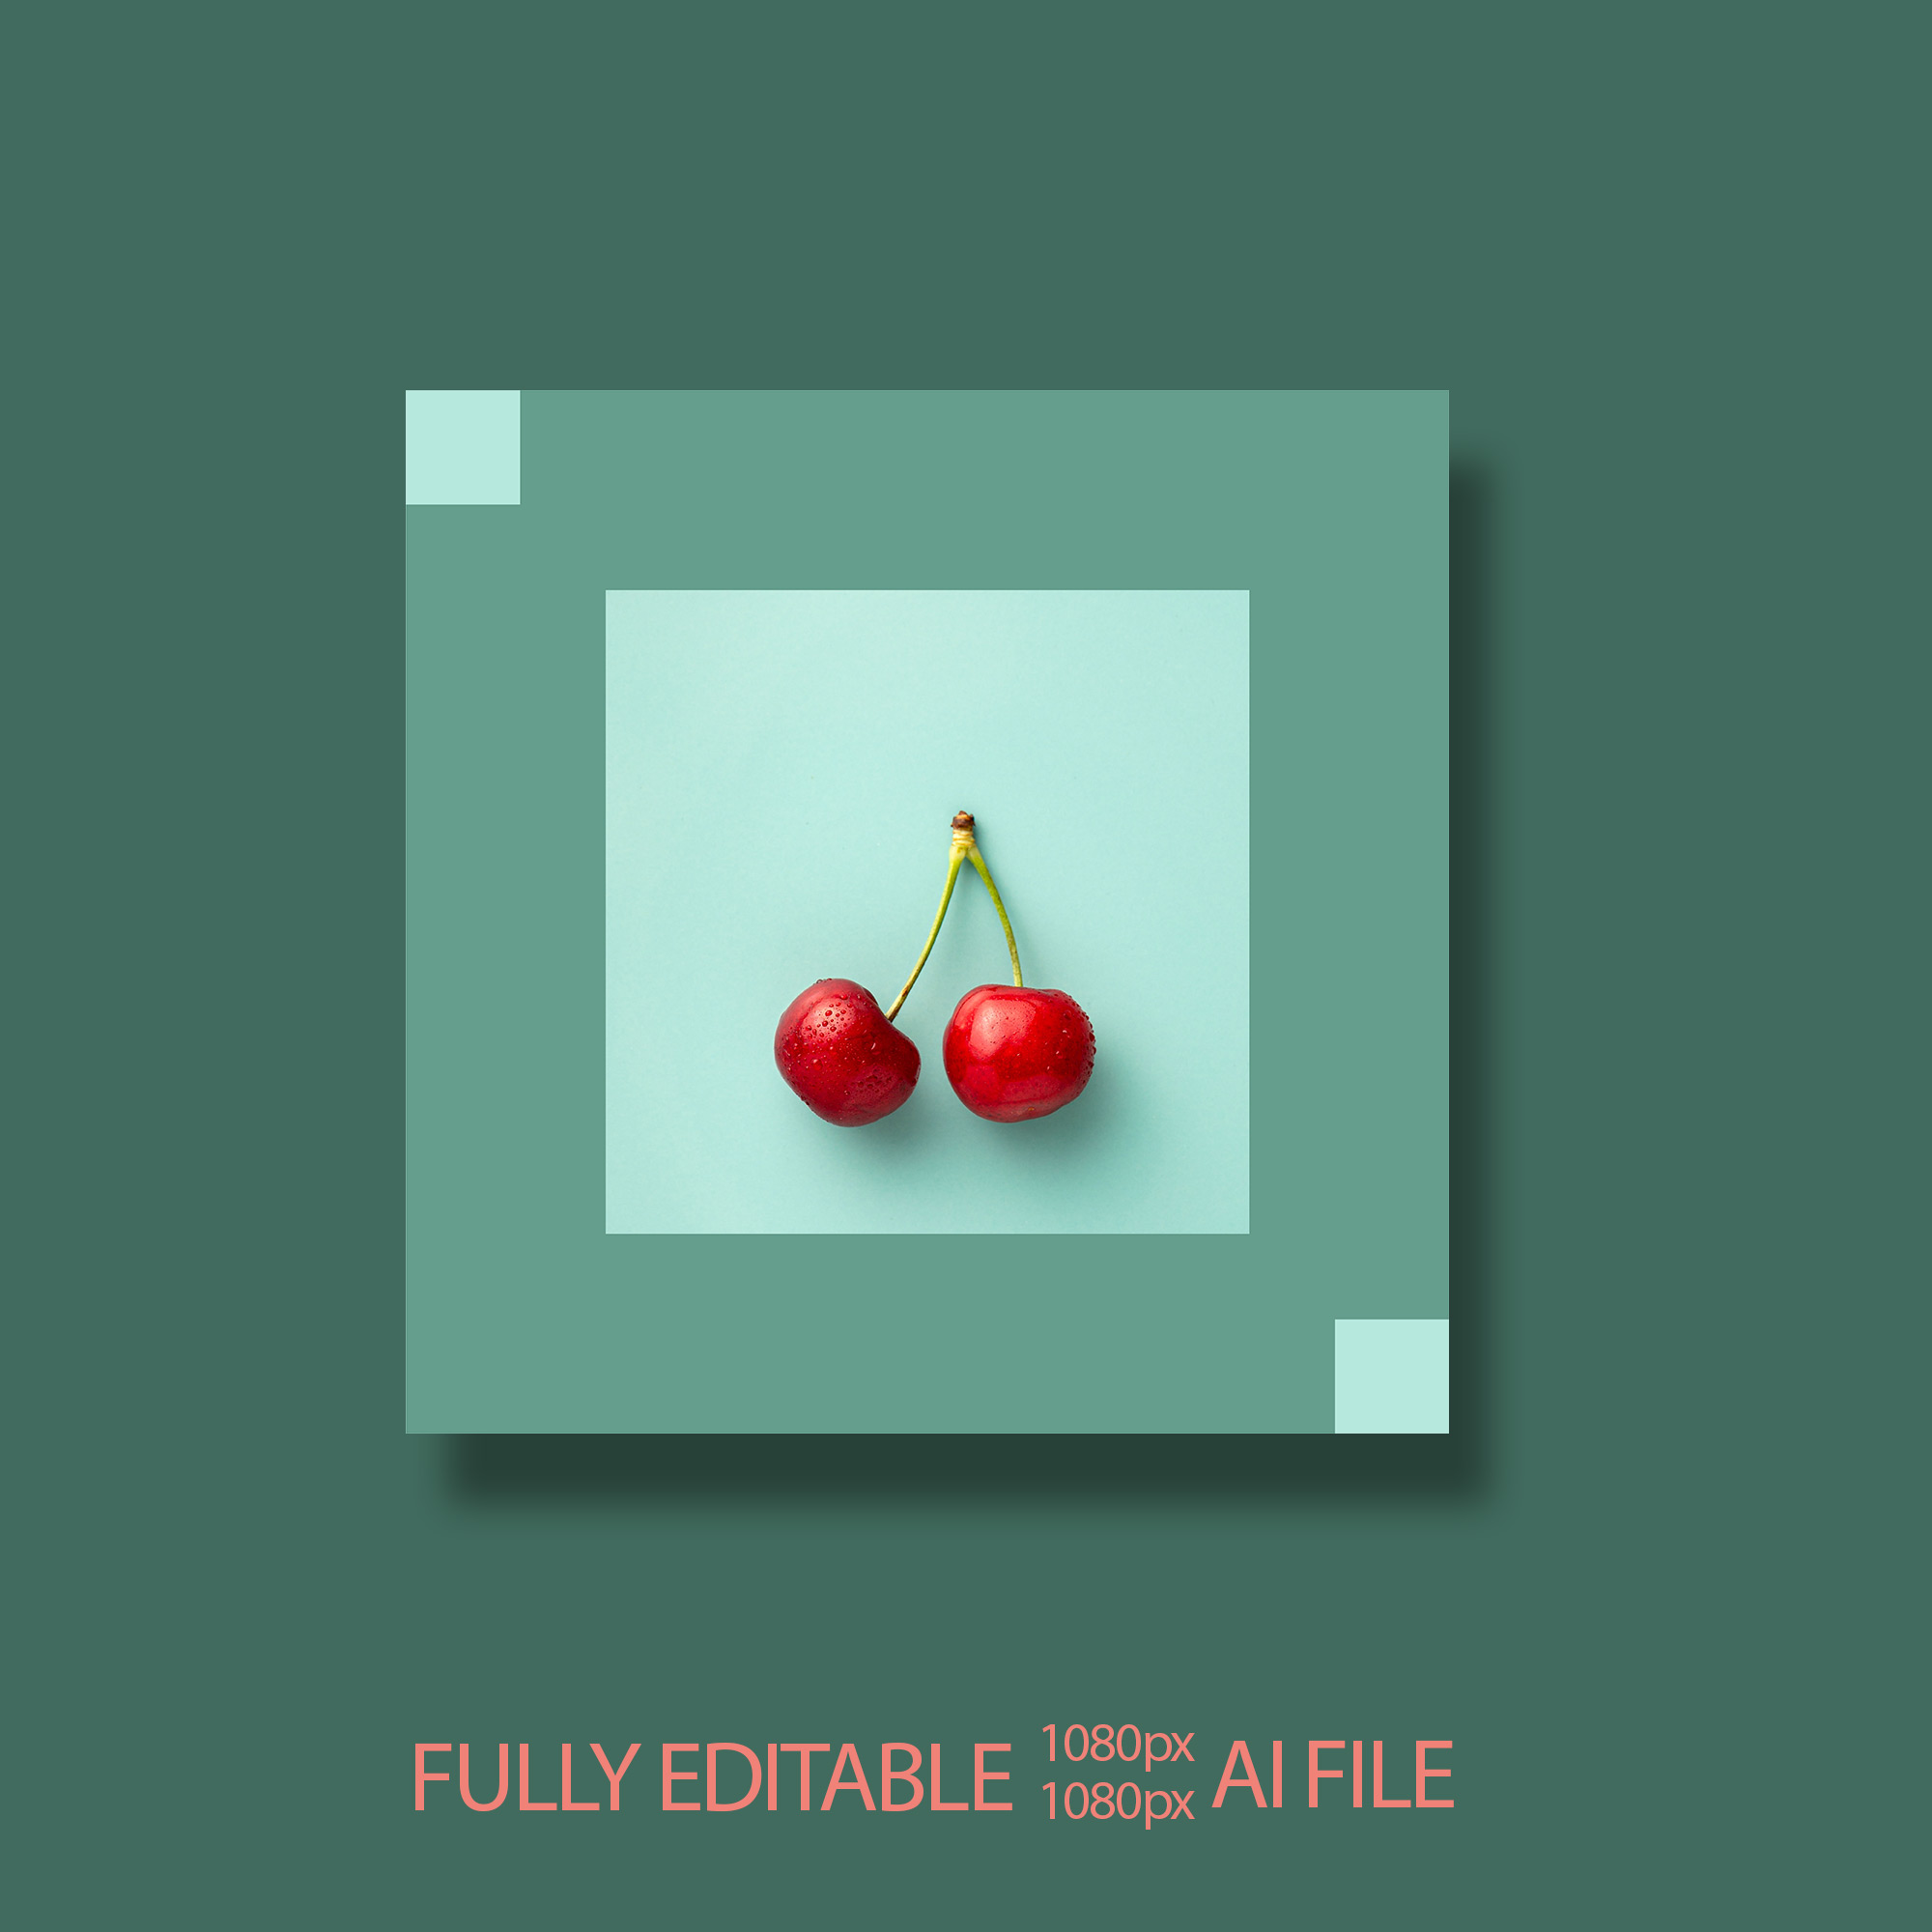 Picture of two cherries on a green background.